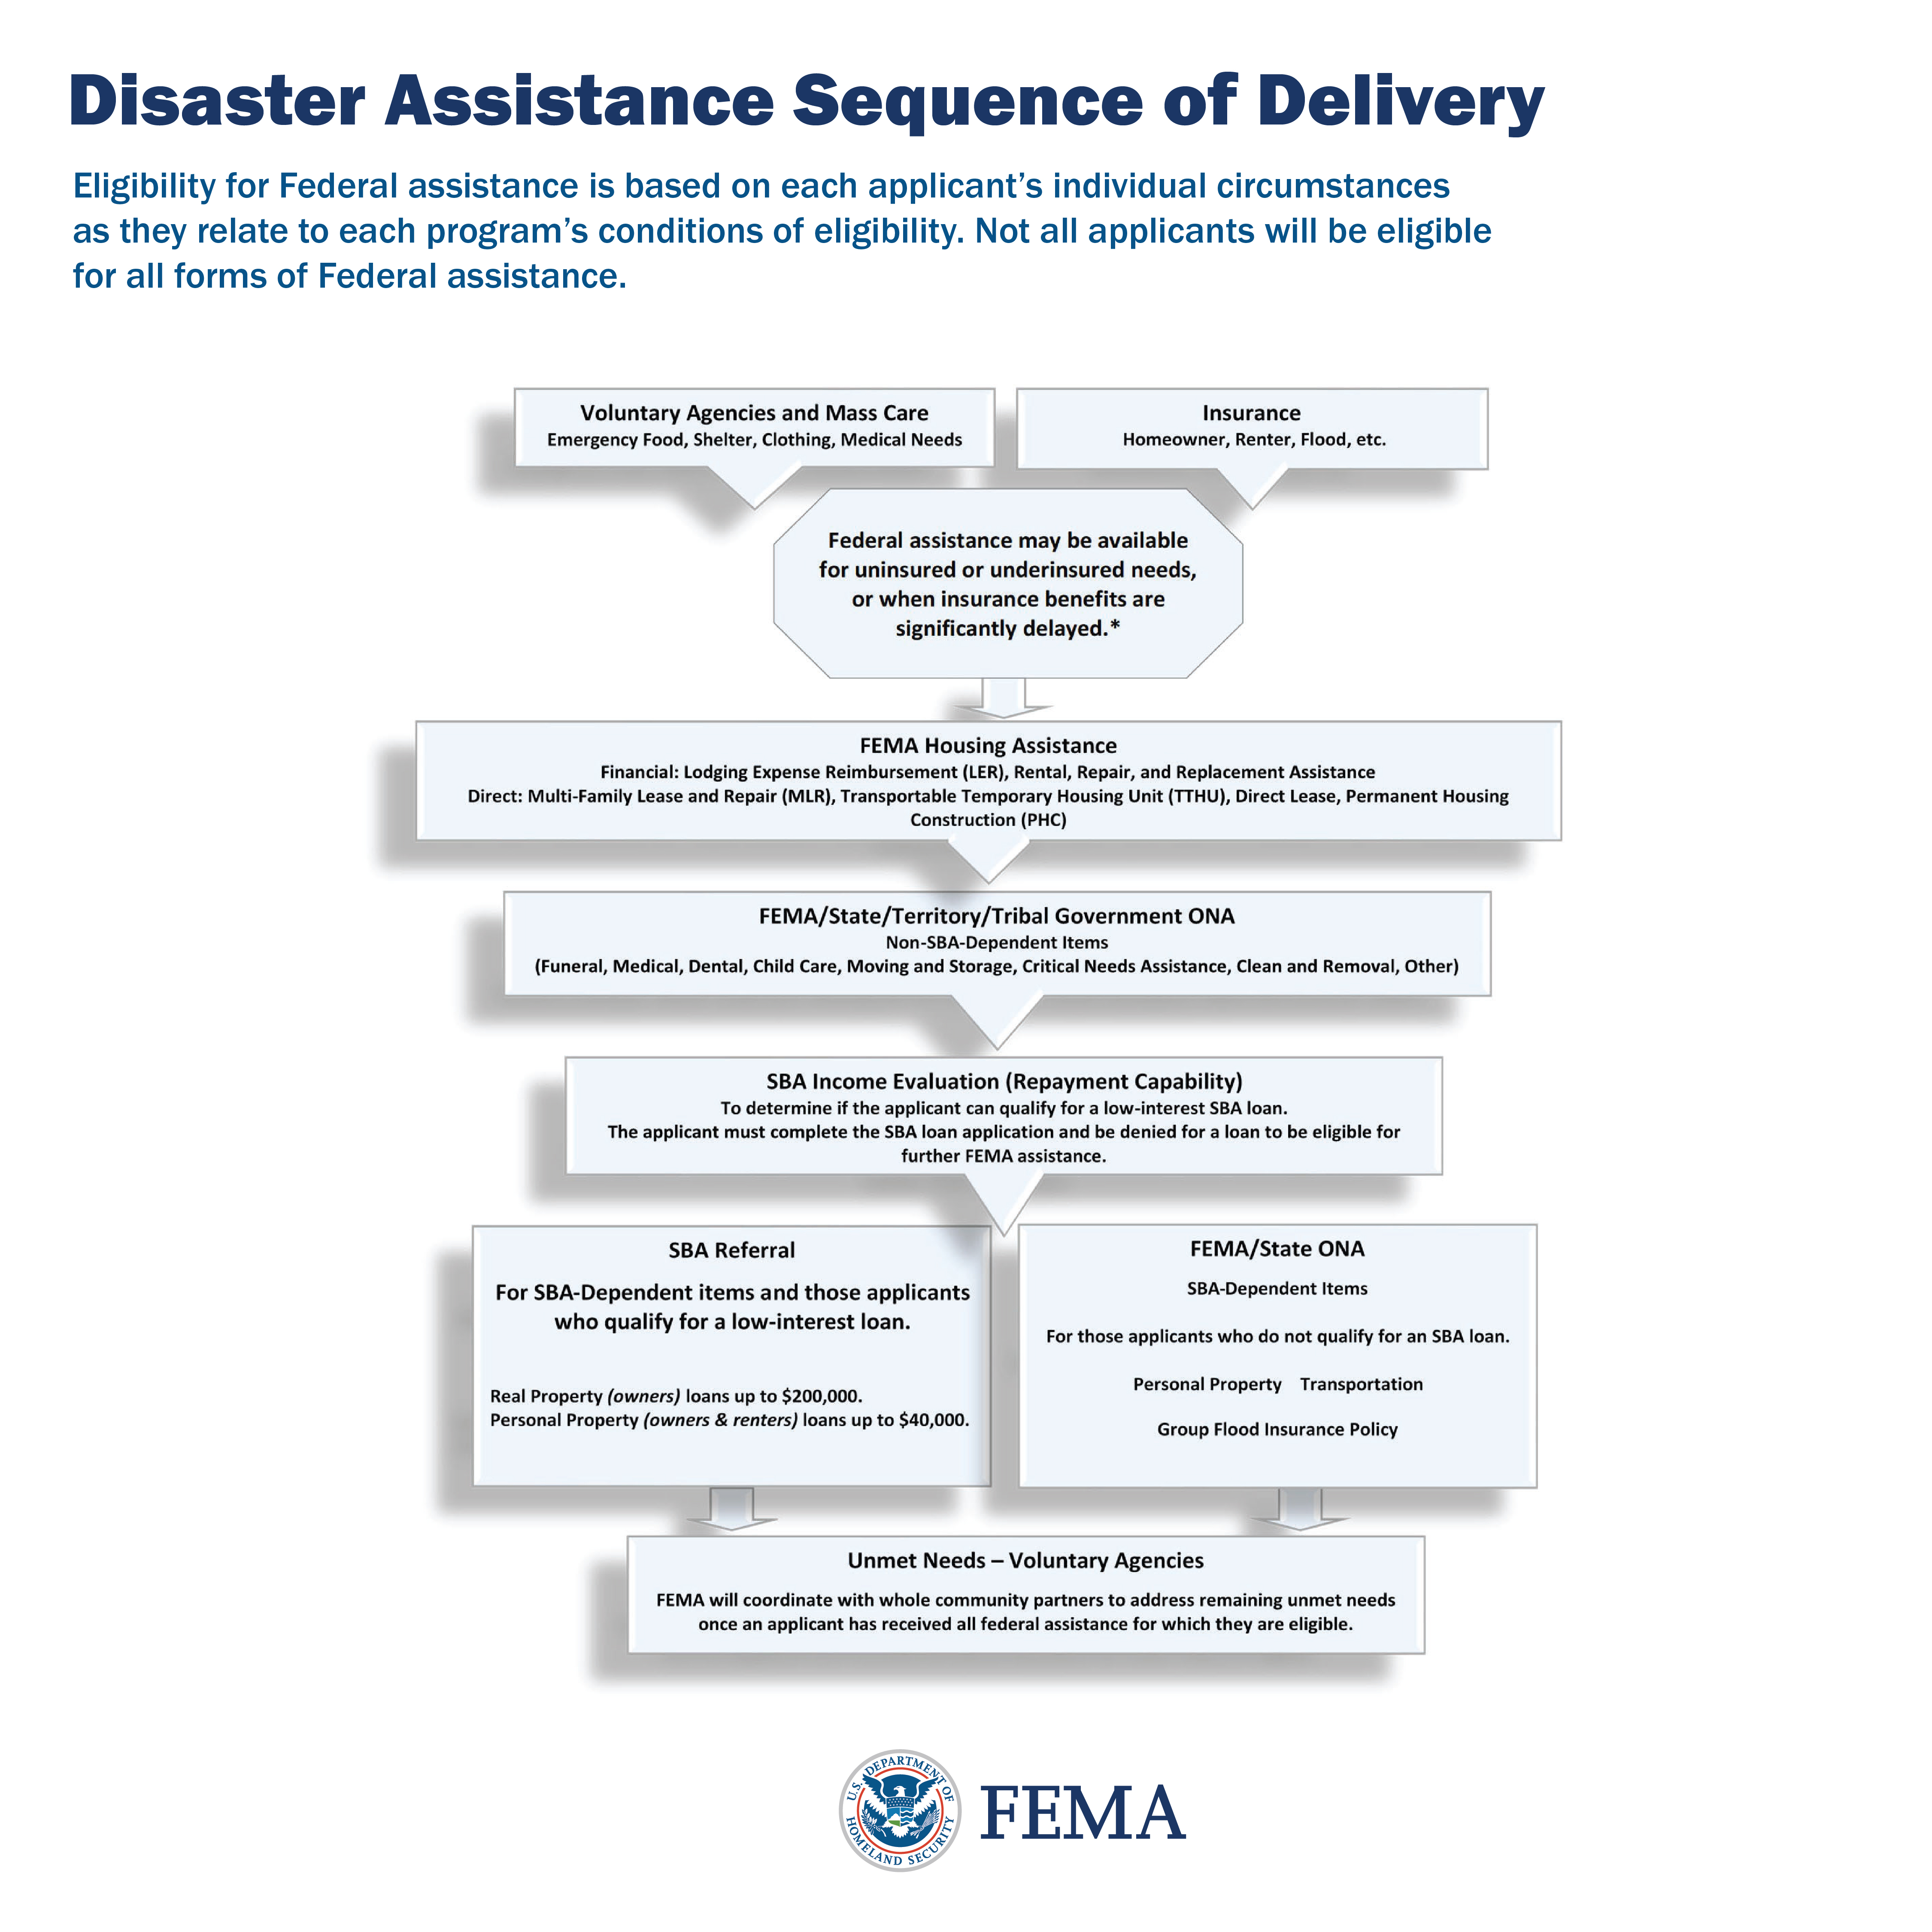 Disaster Assistance Sequence of Delivery Graphic